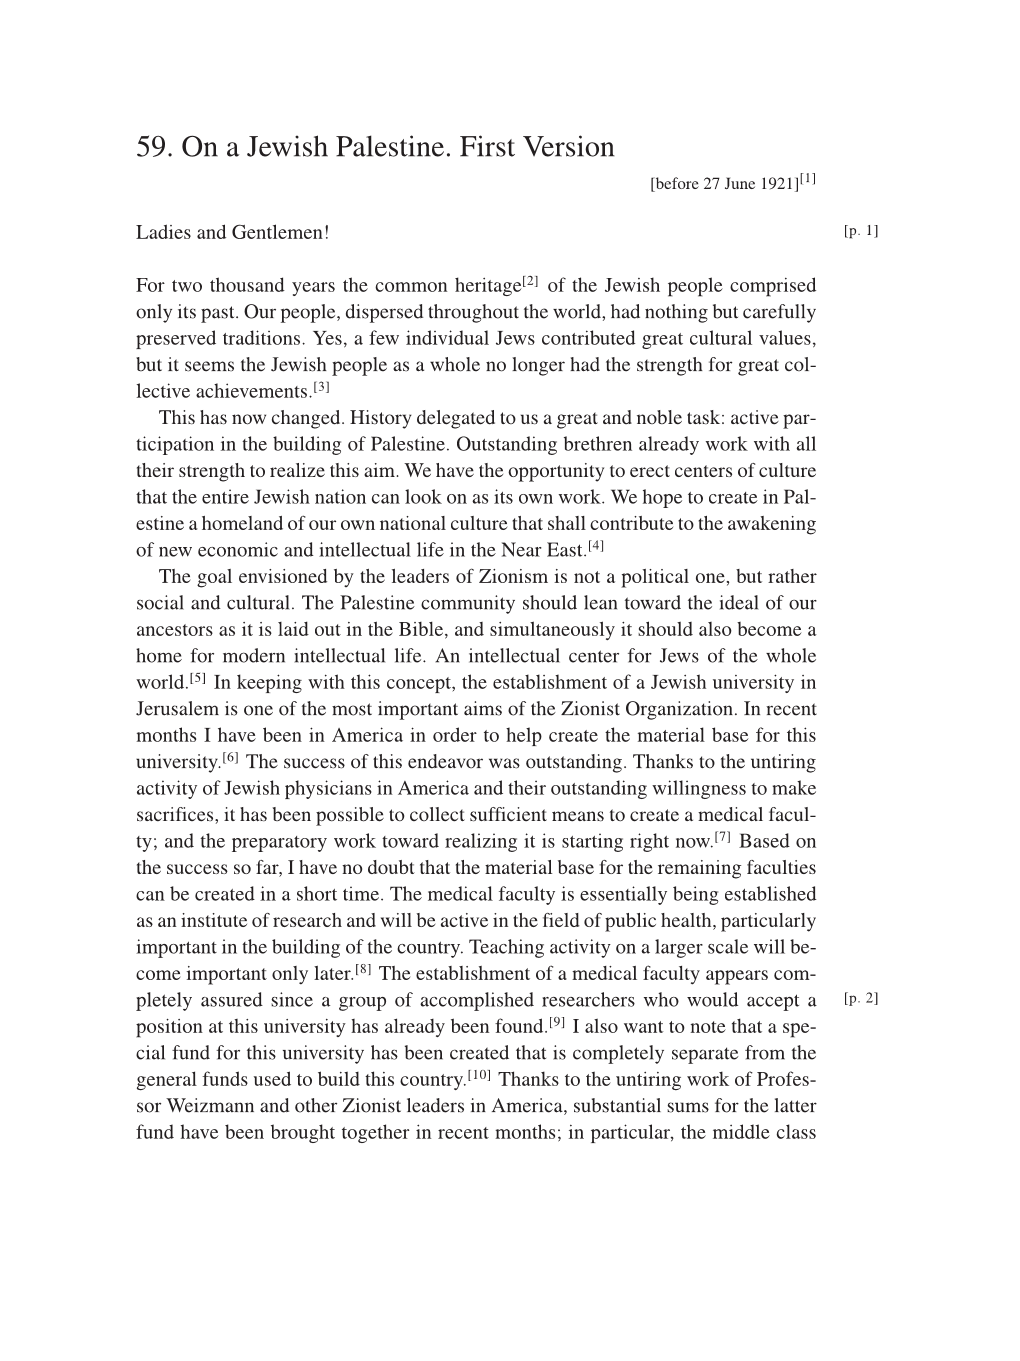 Volume 7: The Berlin Years: Writings, 1918-1921 (English translation supplement) page 241